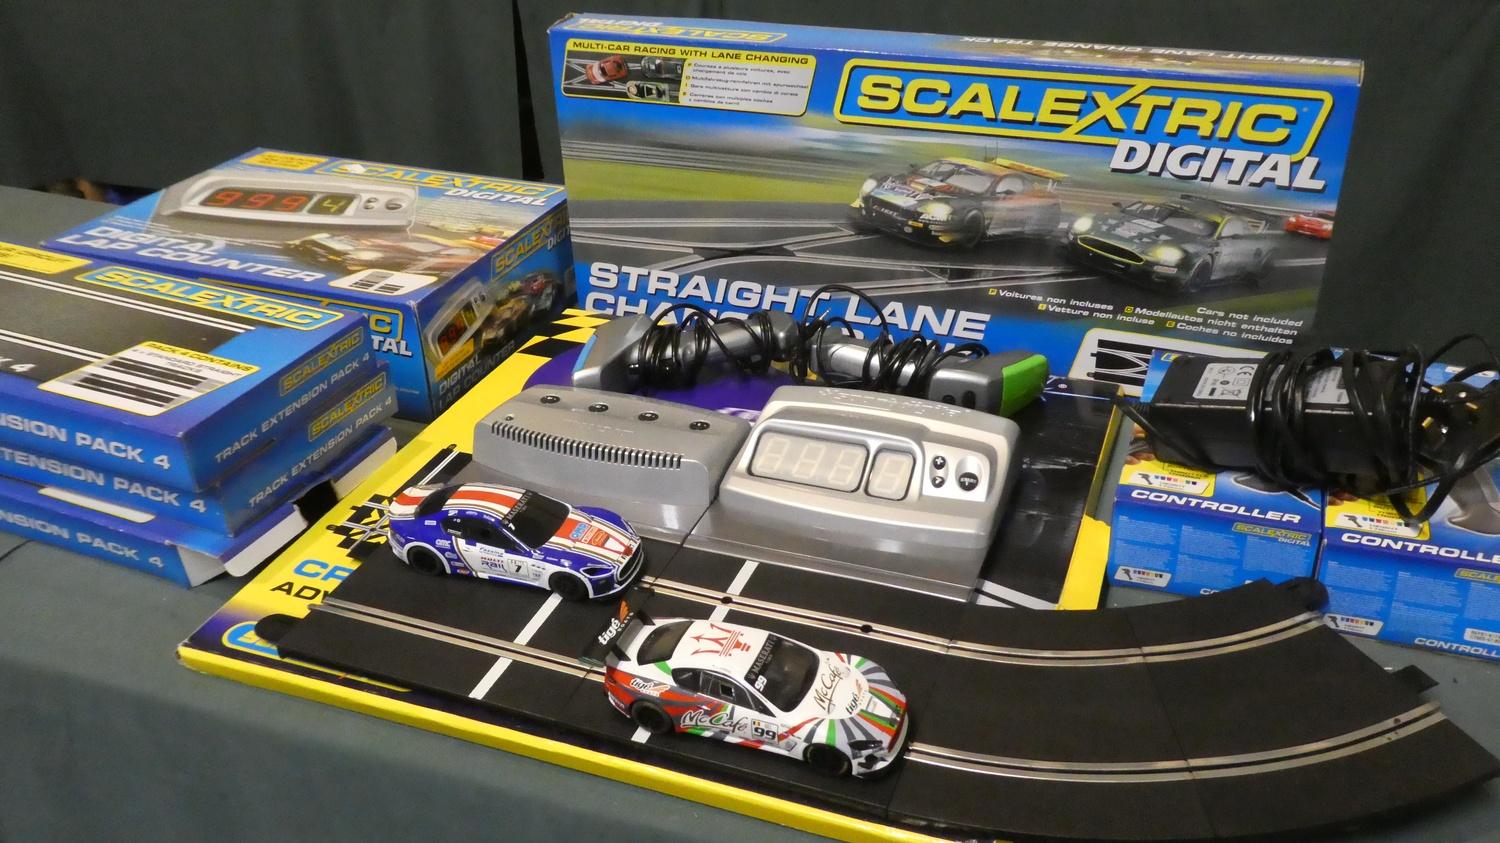 A Collection of Scalextric Digital to Include Two Maserati Cars, Controllers, Track, Digital Lap - Image 2 of 3